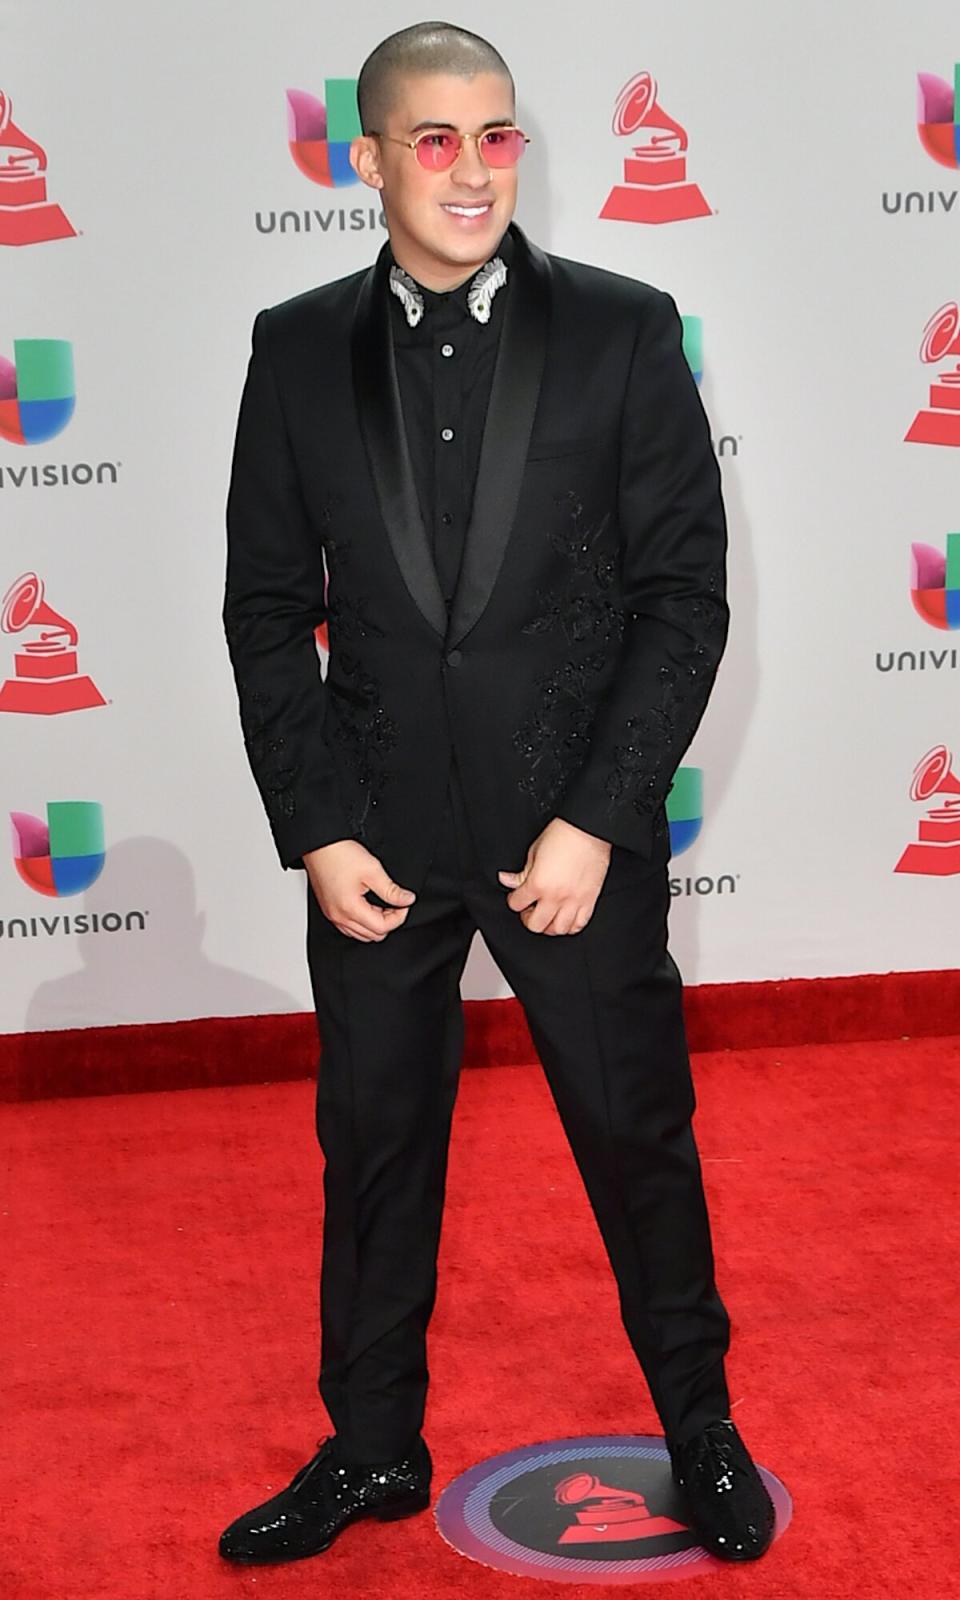 Bad Bunny attends the 18th Annual Latin Grammy Awards at MGM Grand Garden Arena on November 16, 2017 in Las Vegas, Nevada